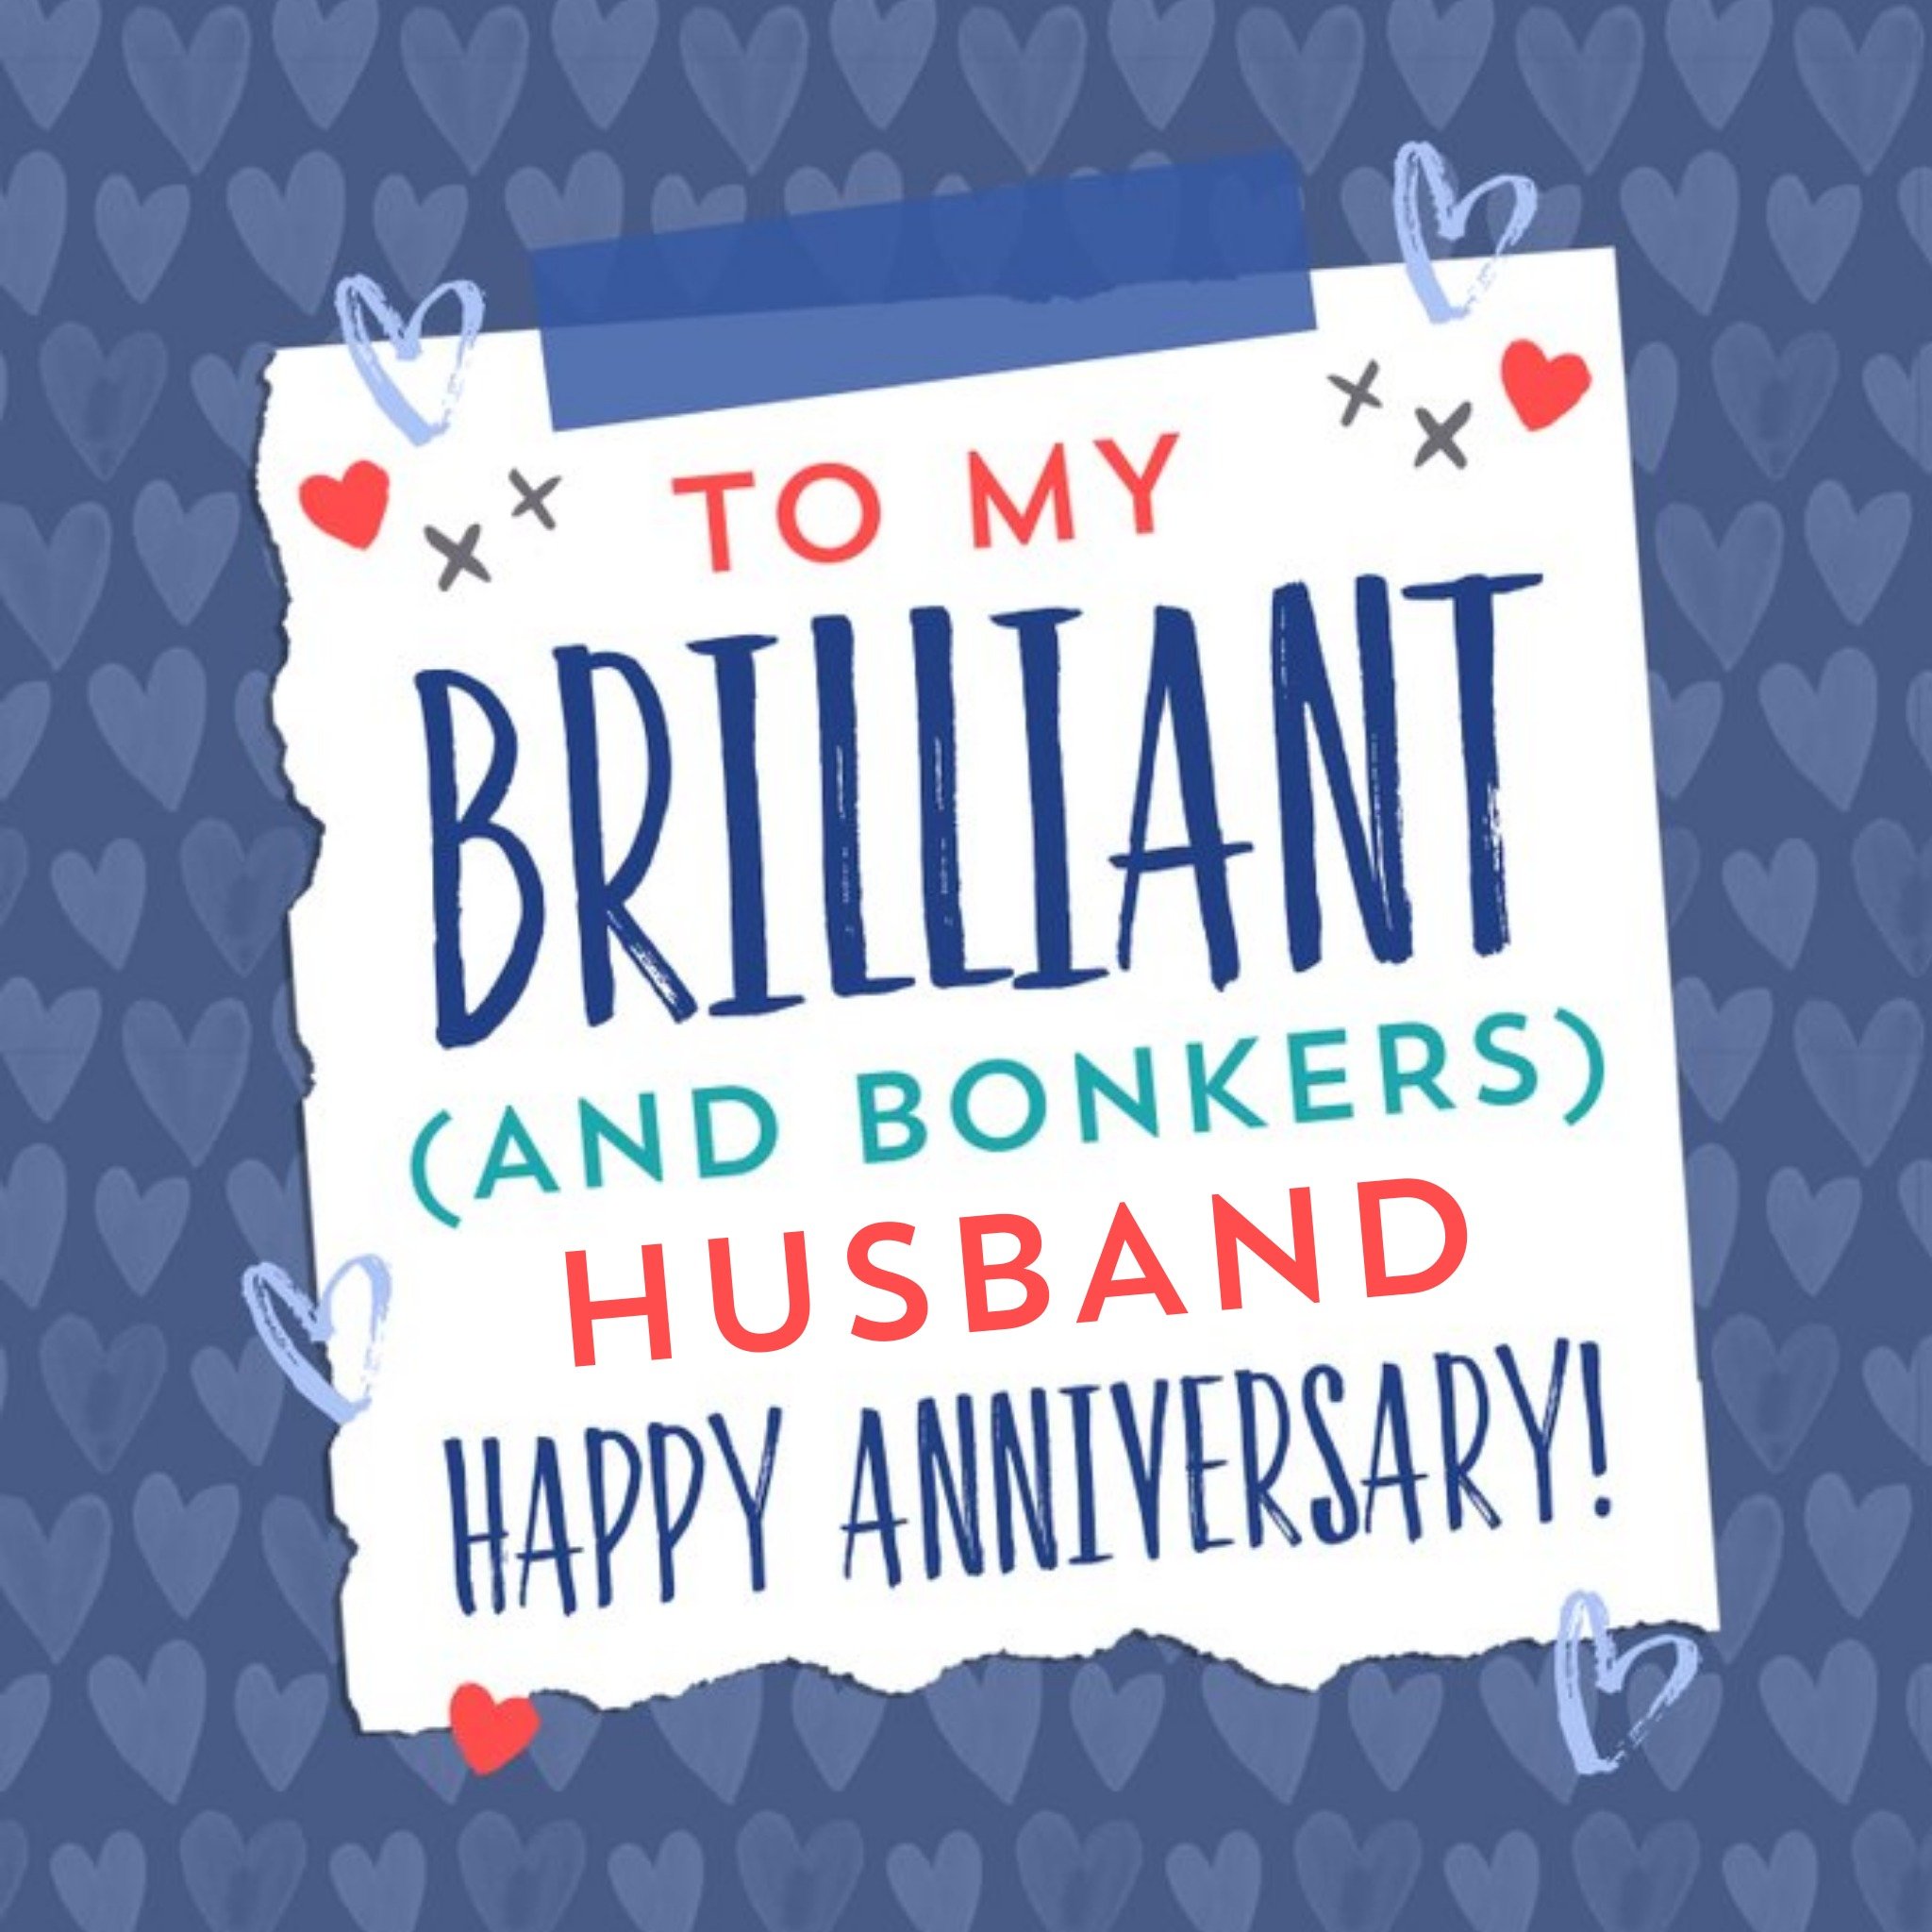 Moonpig To My Brilliant And Bonkers Husband Happy Anniversary Card, Large